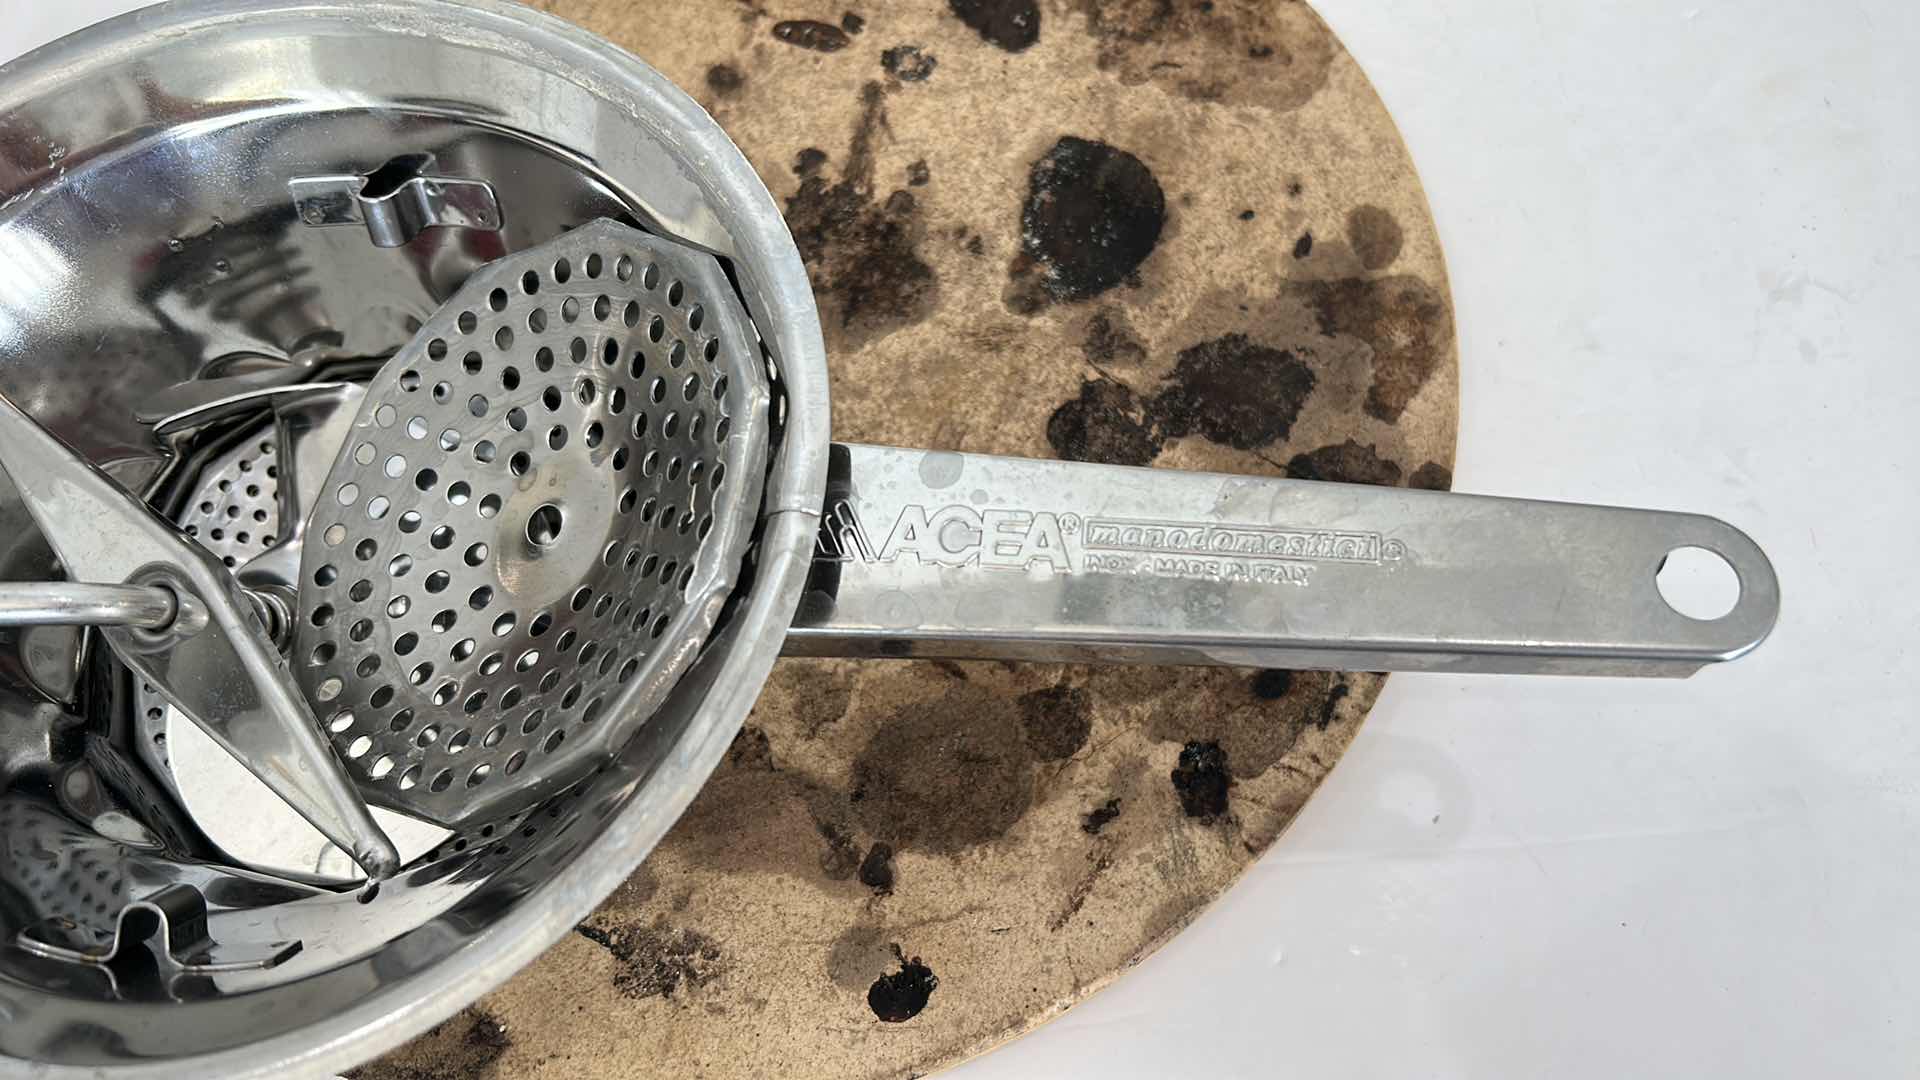 Photo 4 of KITCHEN TOOLS / ACCESORIES - PIZZA AND BREAD BAKING STONE AND ACEA MANODOMESTICI STAINLESS STEEL GRATER/SLICER/MIXER made in Italy